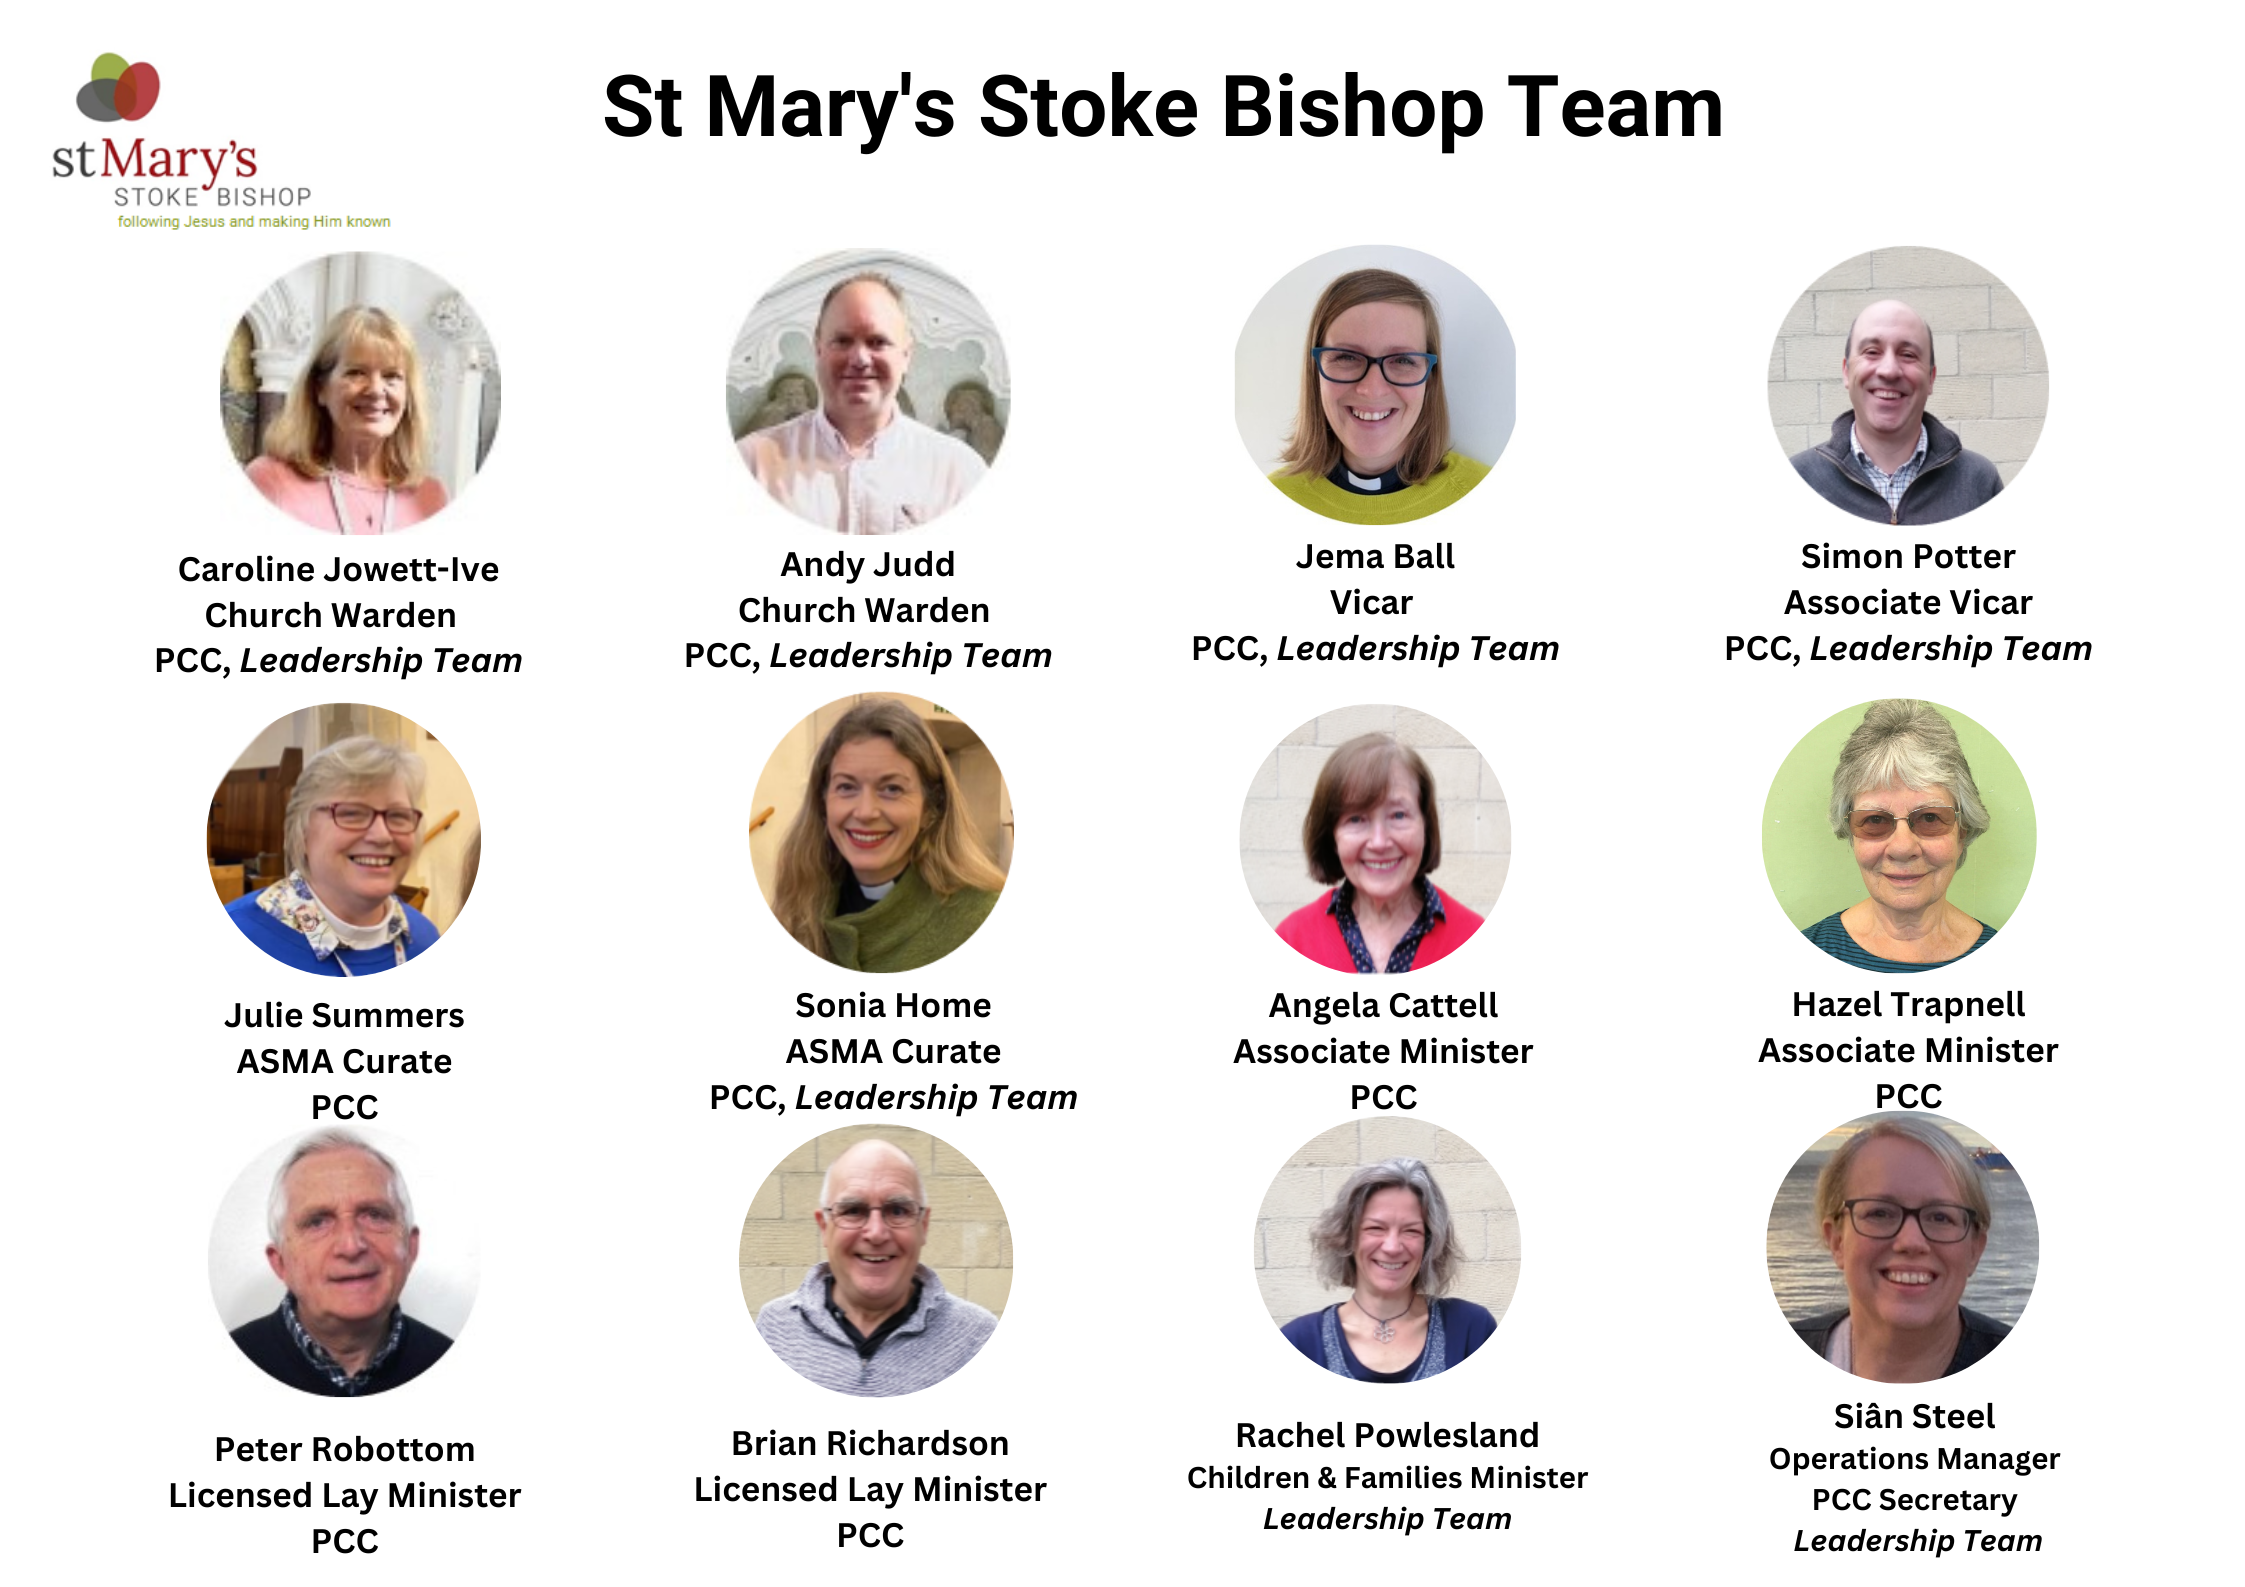 St Mary's Stoke Bishop Team